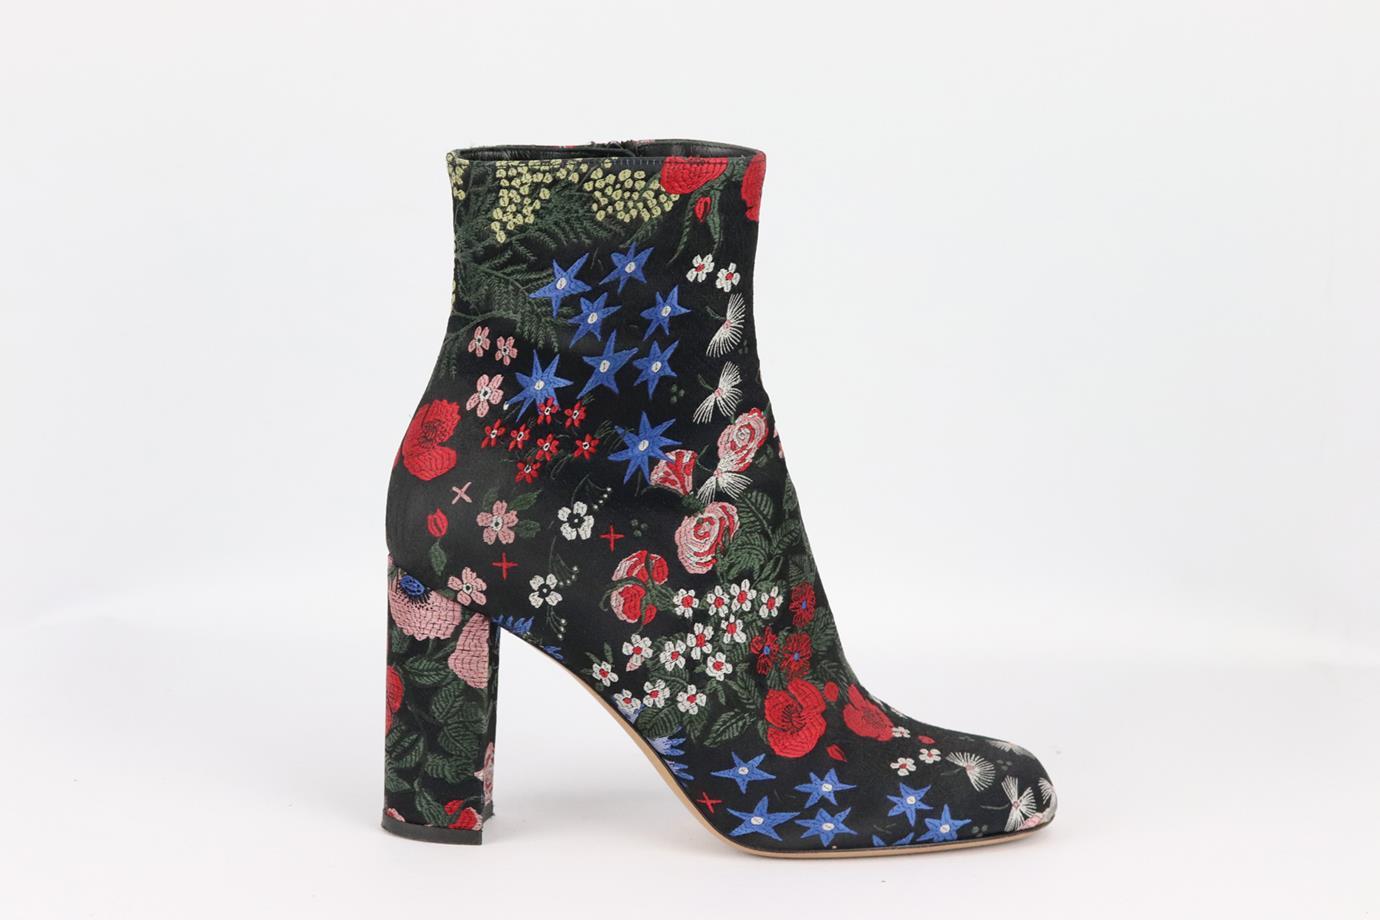 Valentino Garavani embroidered satin ankle boots Black, red, pink, green and white. Zip fastening at side. Does not come with dustbag and box. Size: EU 38 (UK 5, US 8). Insole: 9.6 in. Shaft: 5.4 in. Heel: 3 in. Very good condition - Some signs of